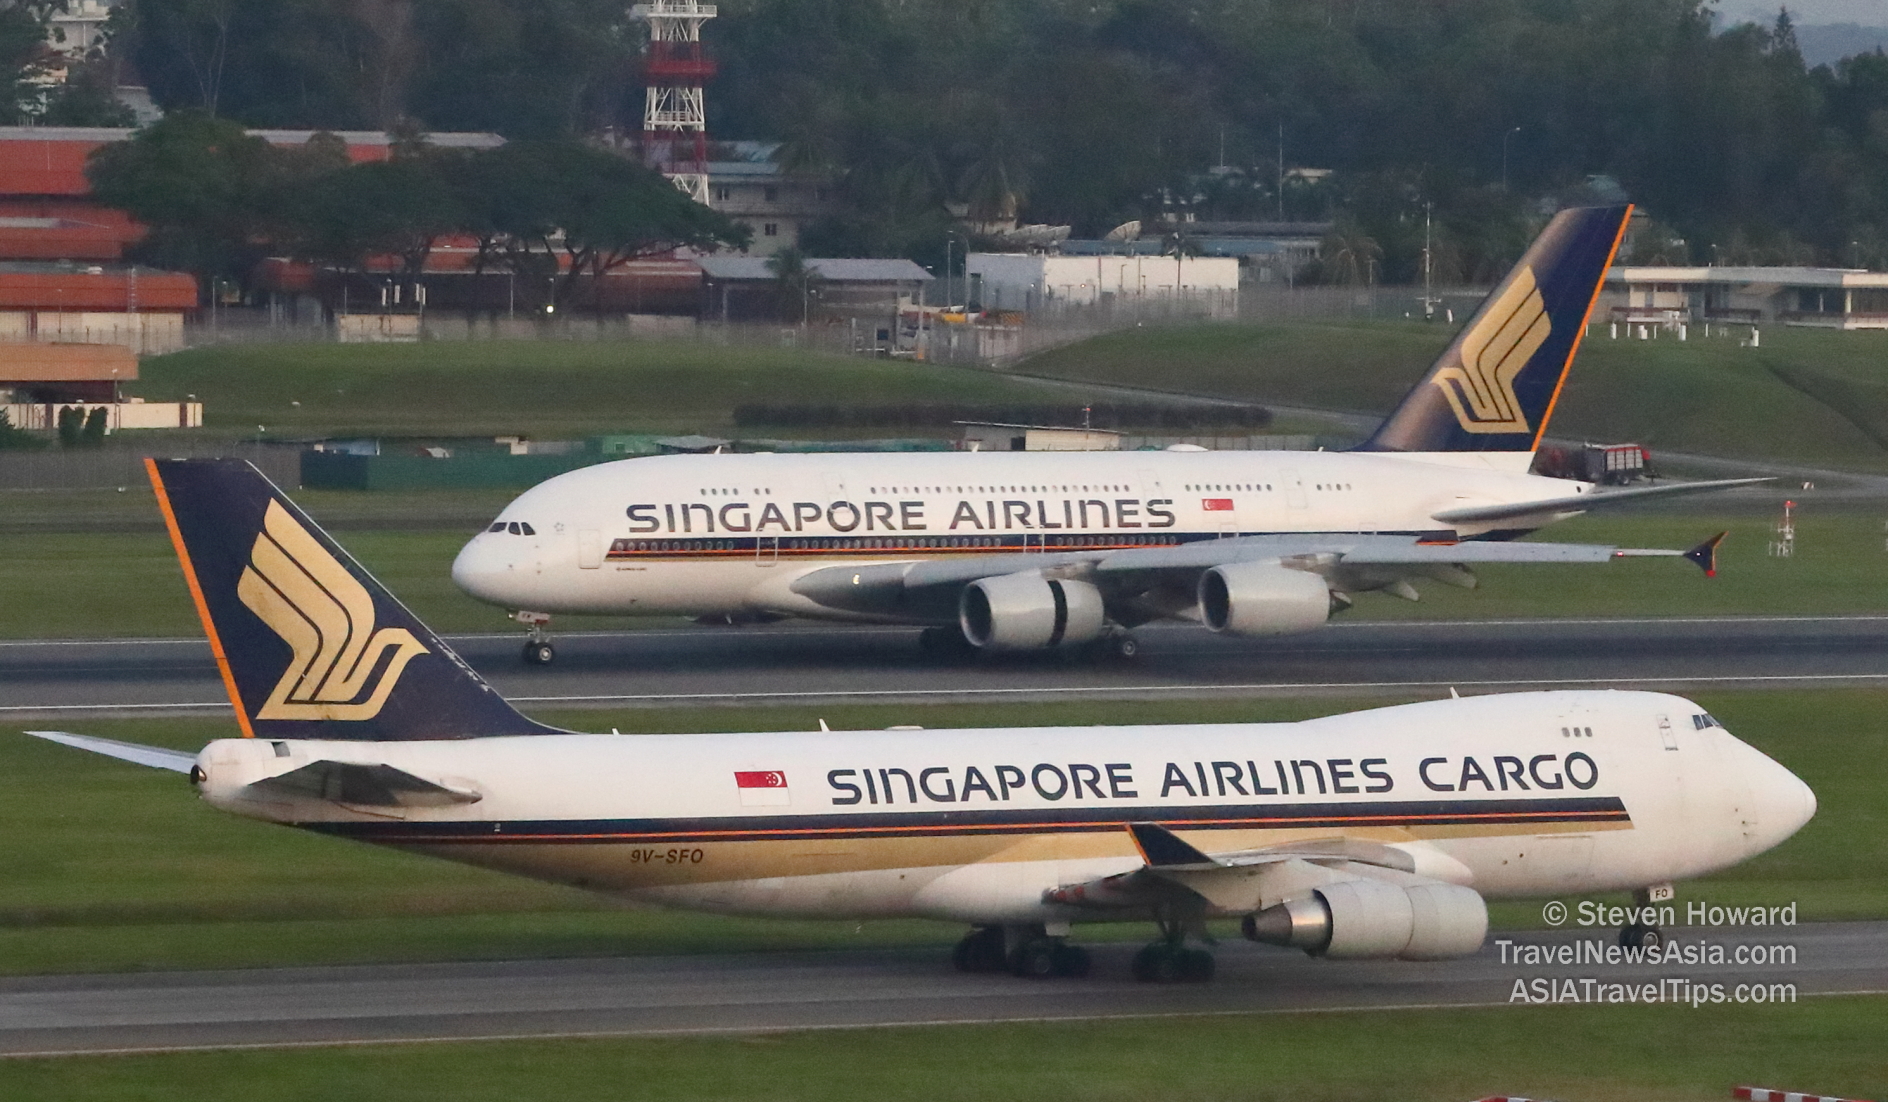 Singapore Airlines aircraft at Changi. Picture by Steven Howard of TravelNewsAsia.com Click to enlarge.